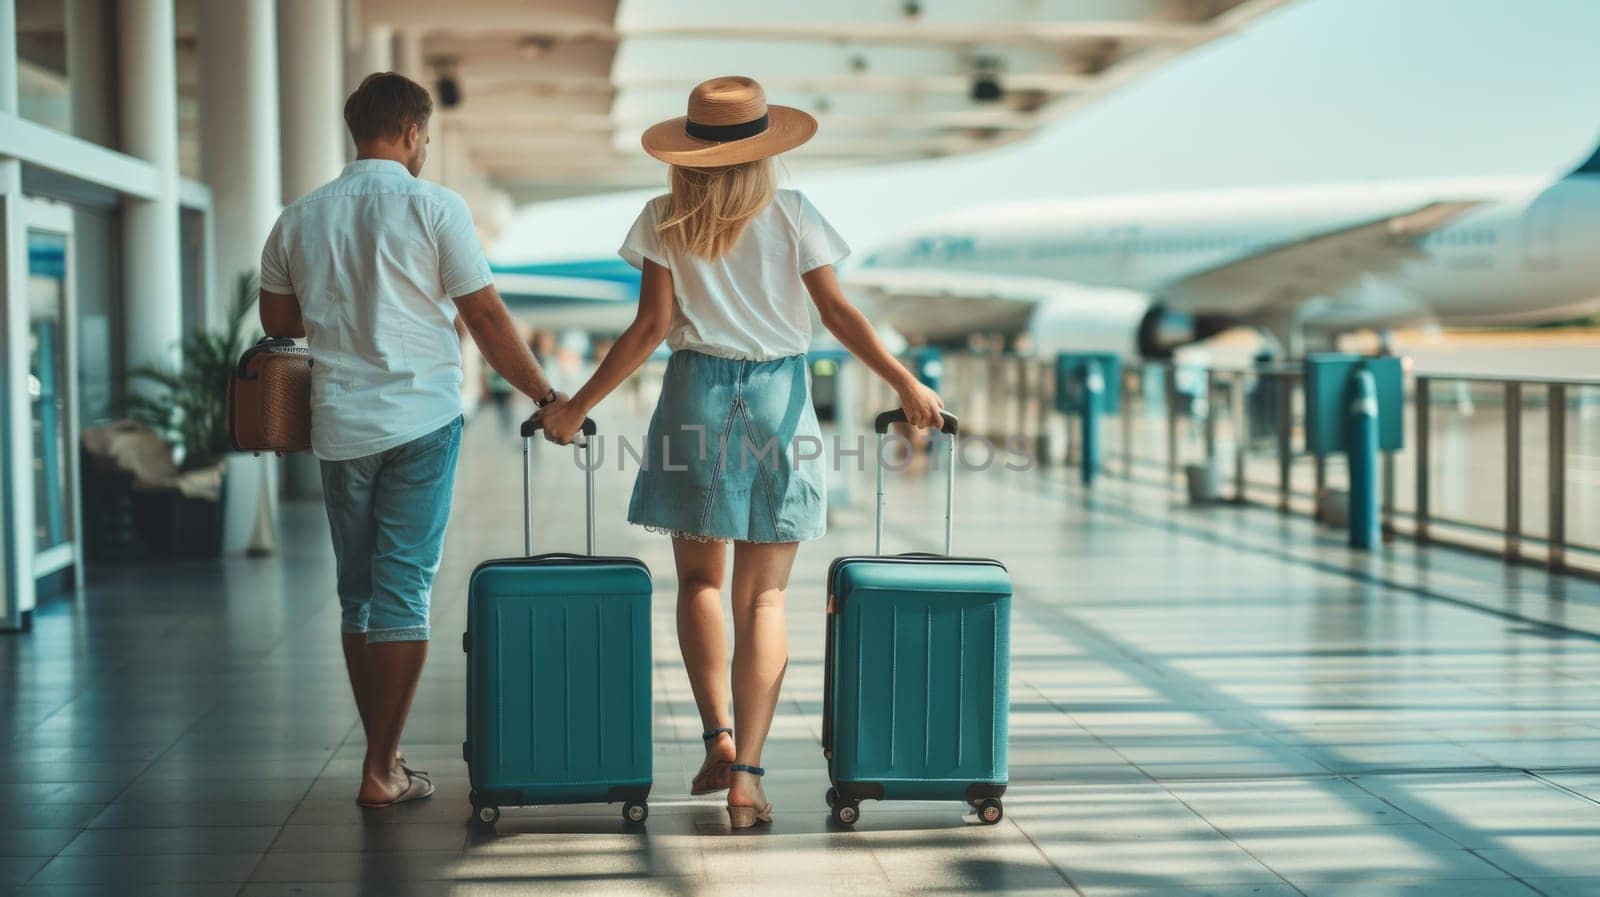 A man and woman walking with two suitcases in an airport